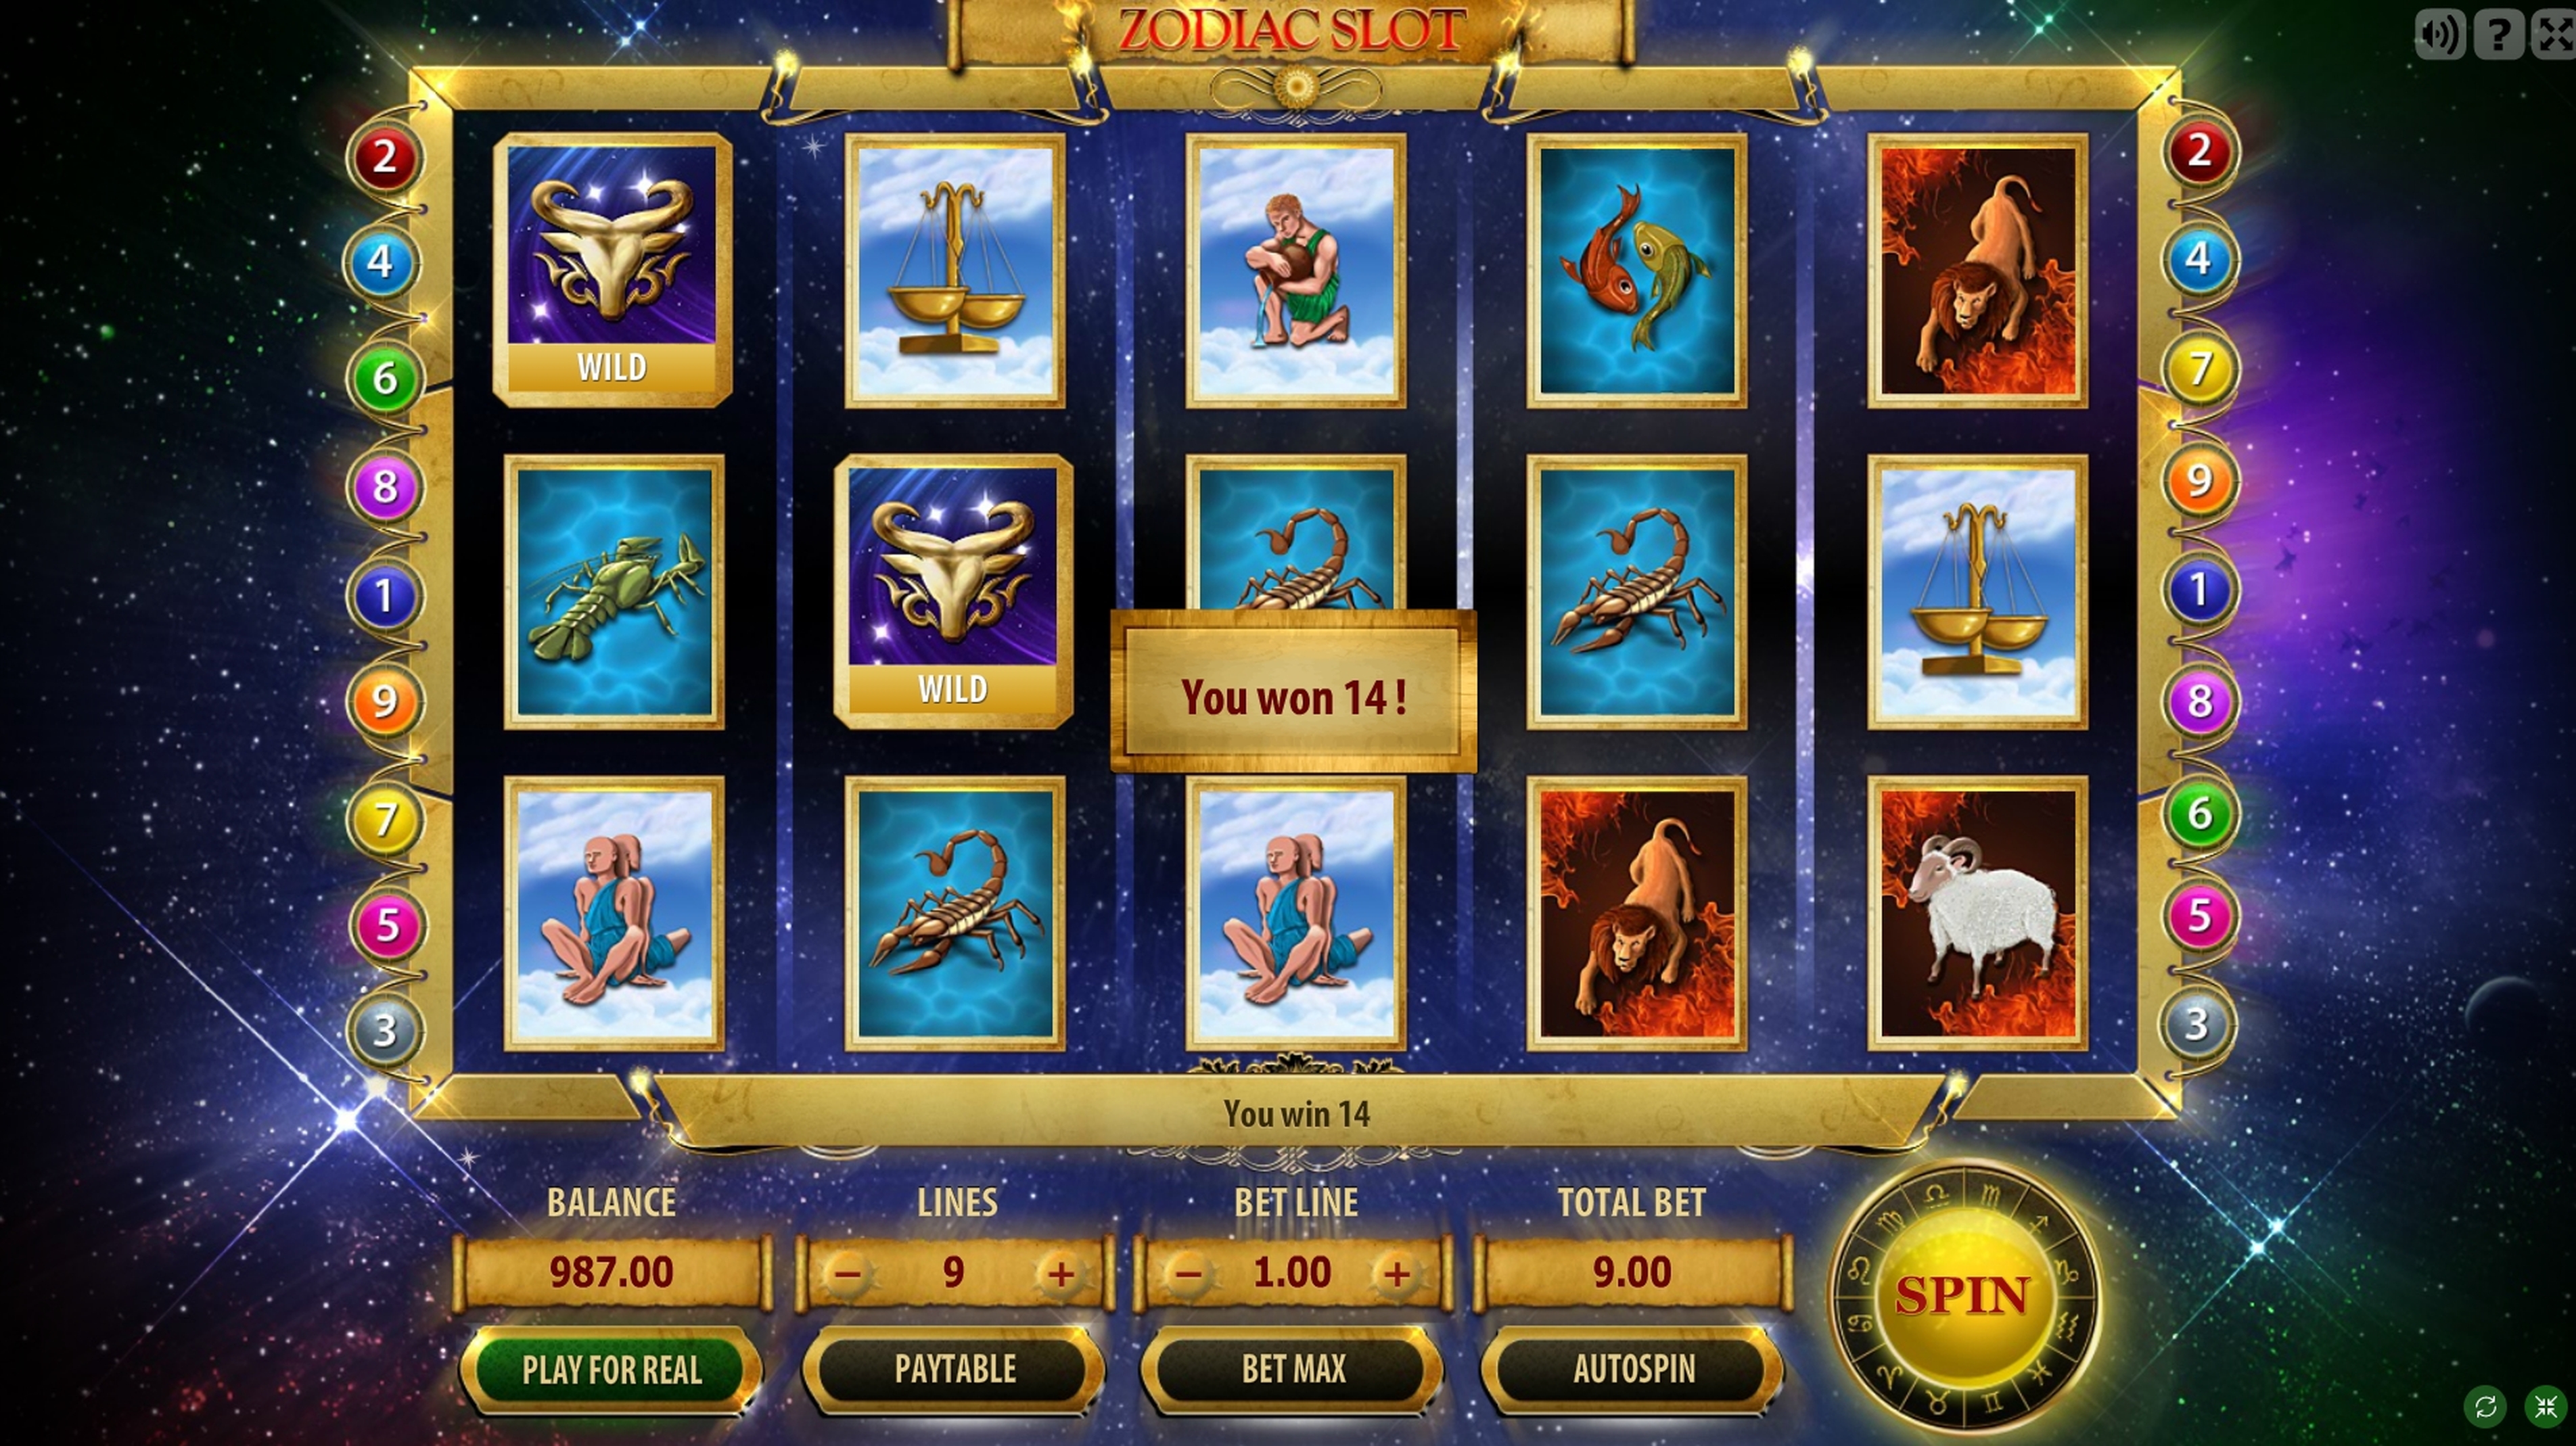 Win Money in Zodiac Slot Free Slot Game by Gamescale Software